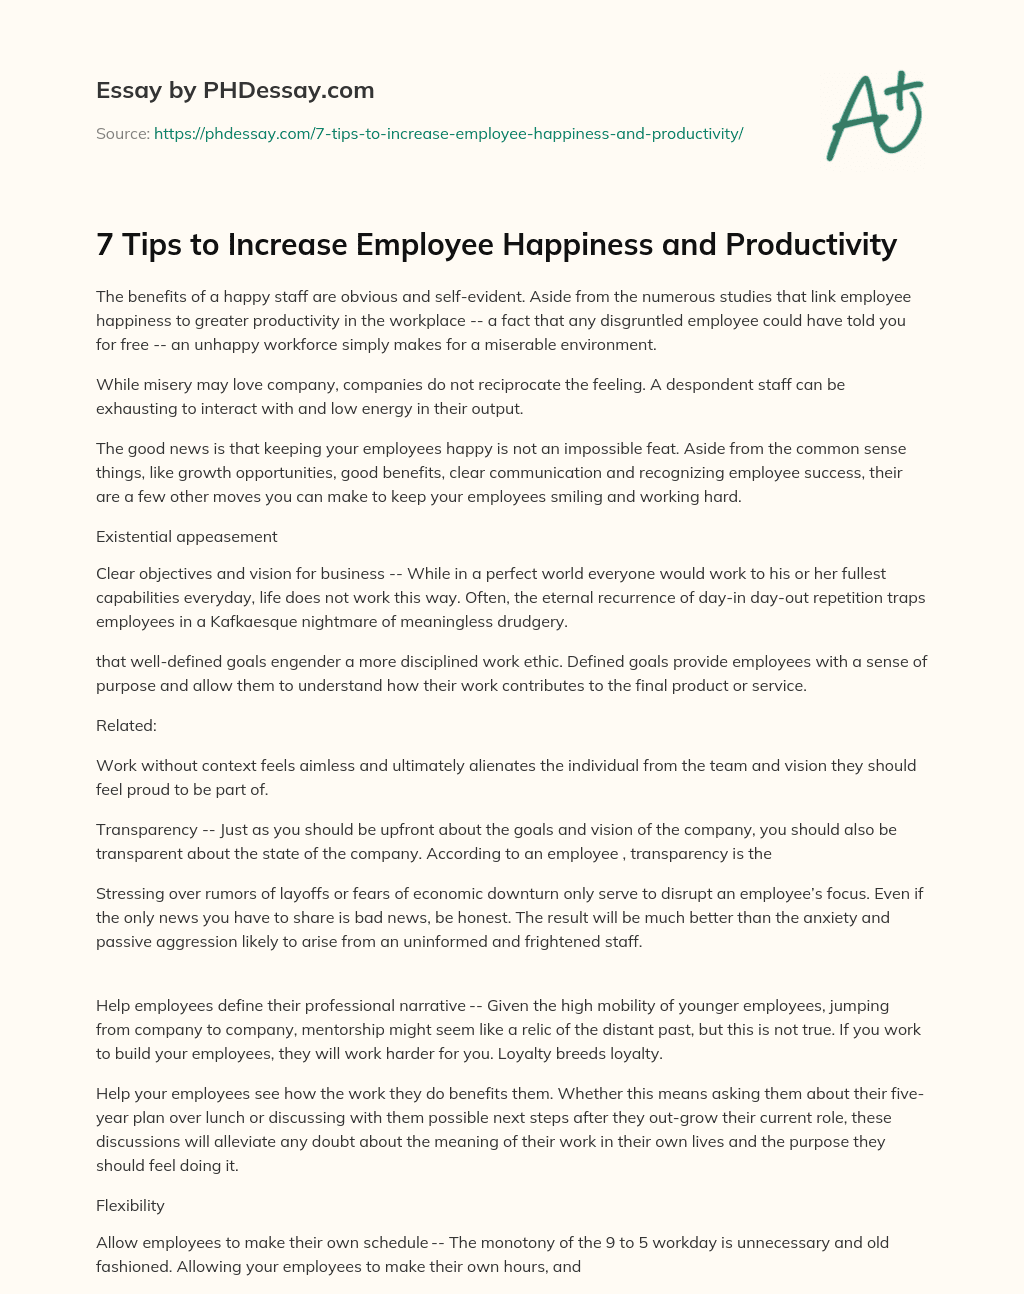 7 Tips to Increase Employee Happiness and Productivity essay